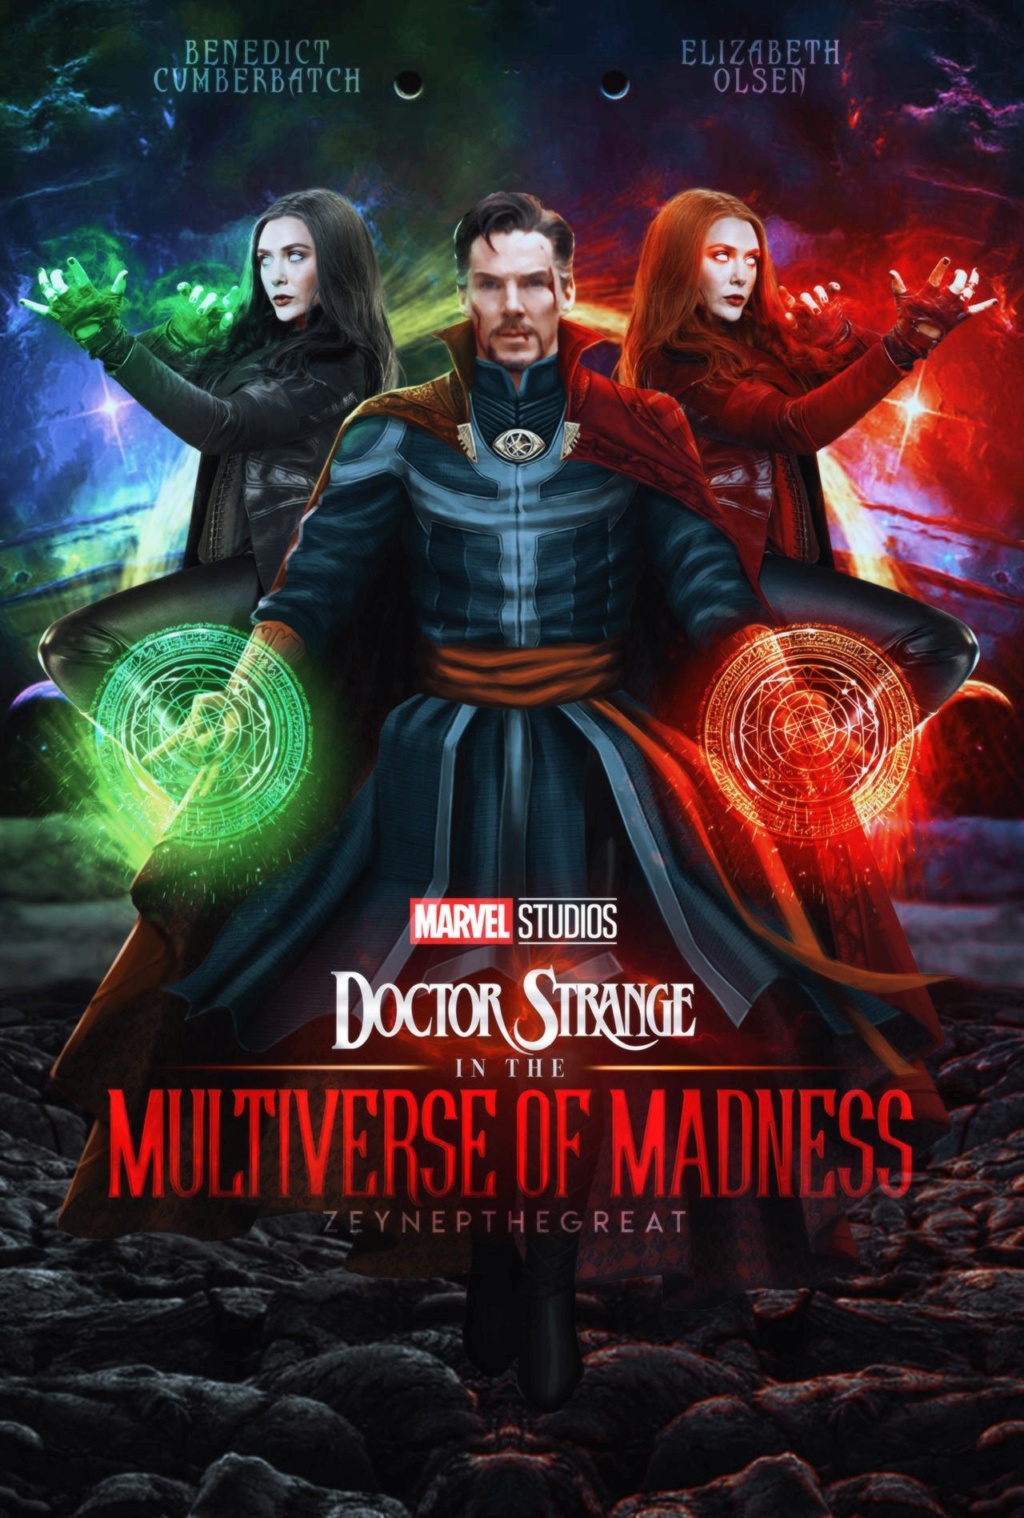 DOCTOR STRANGE IN THE MULTIVERSE OF MADNESS : Chronique d'une mort cérébrale. Save_211